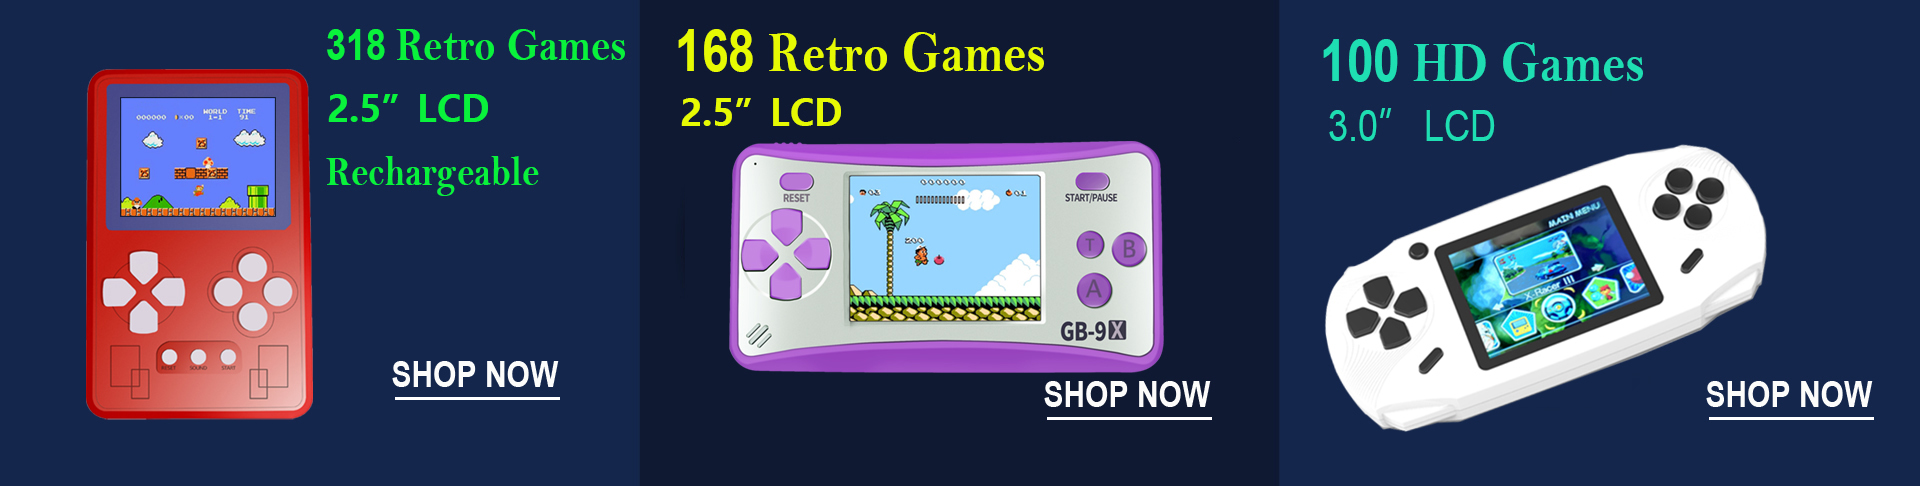 retro handheld game console for kids